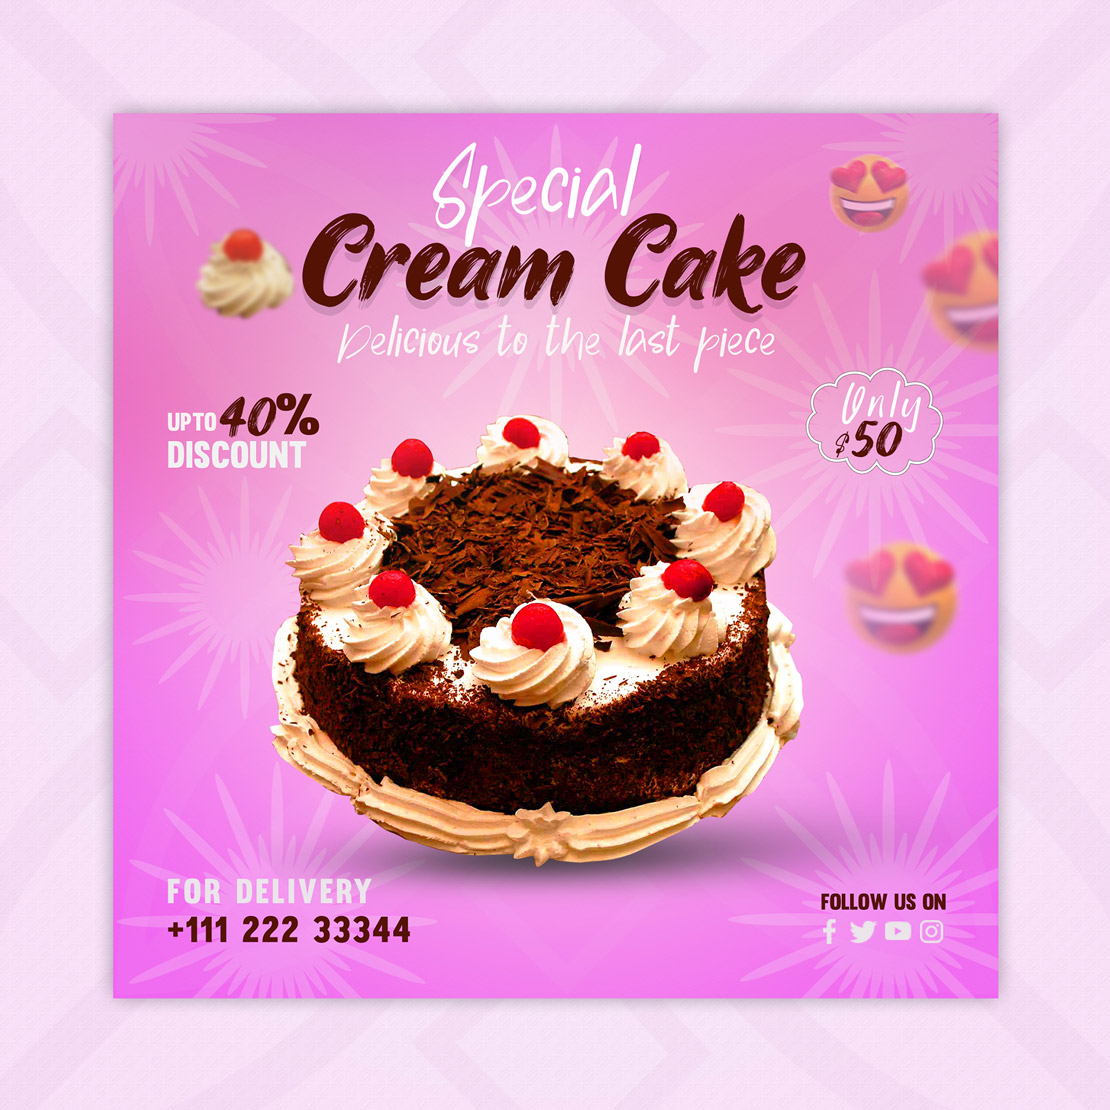 Flyer for a cake shop with a picture of a cake.